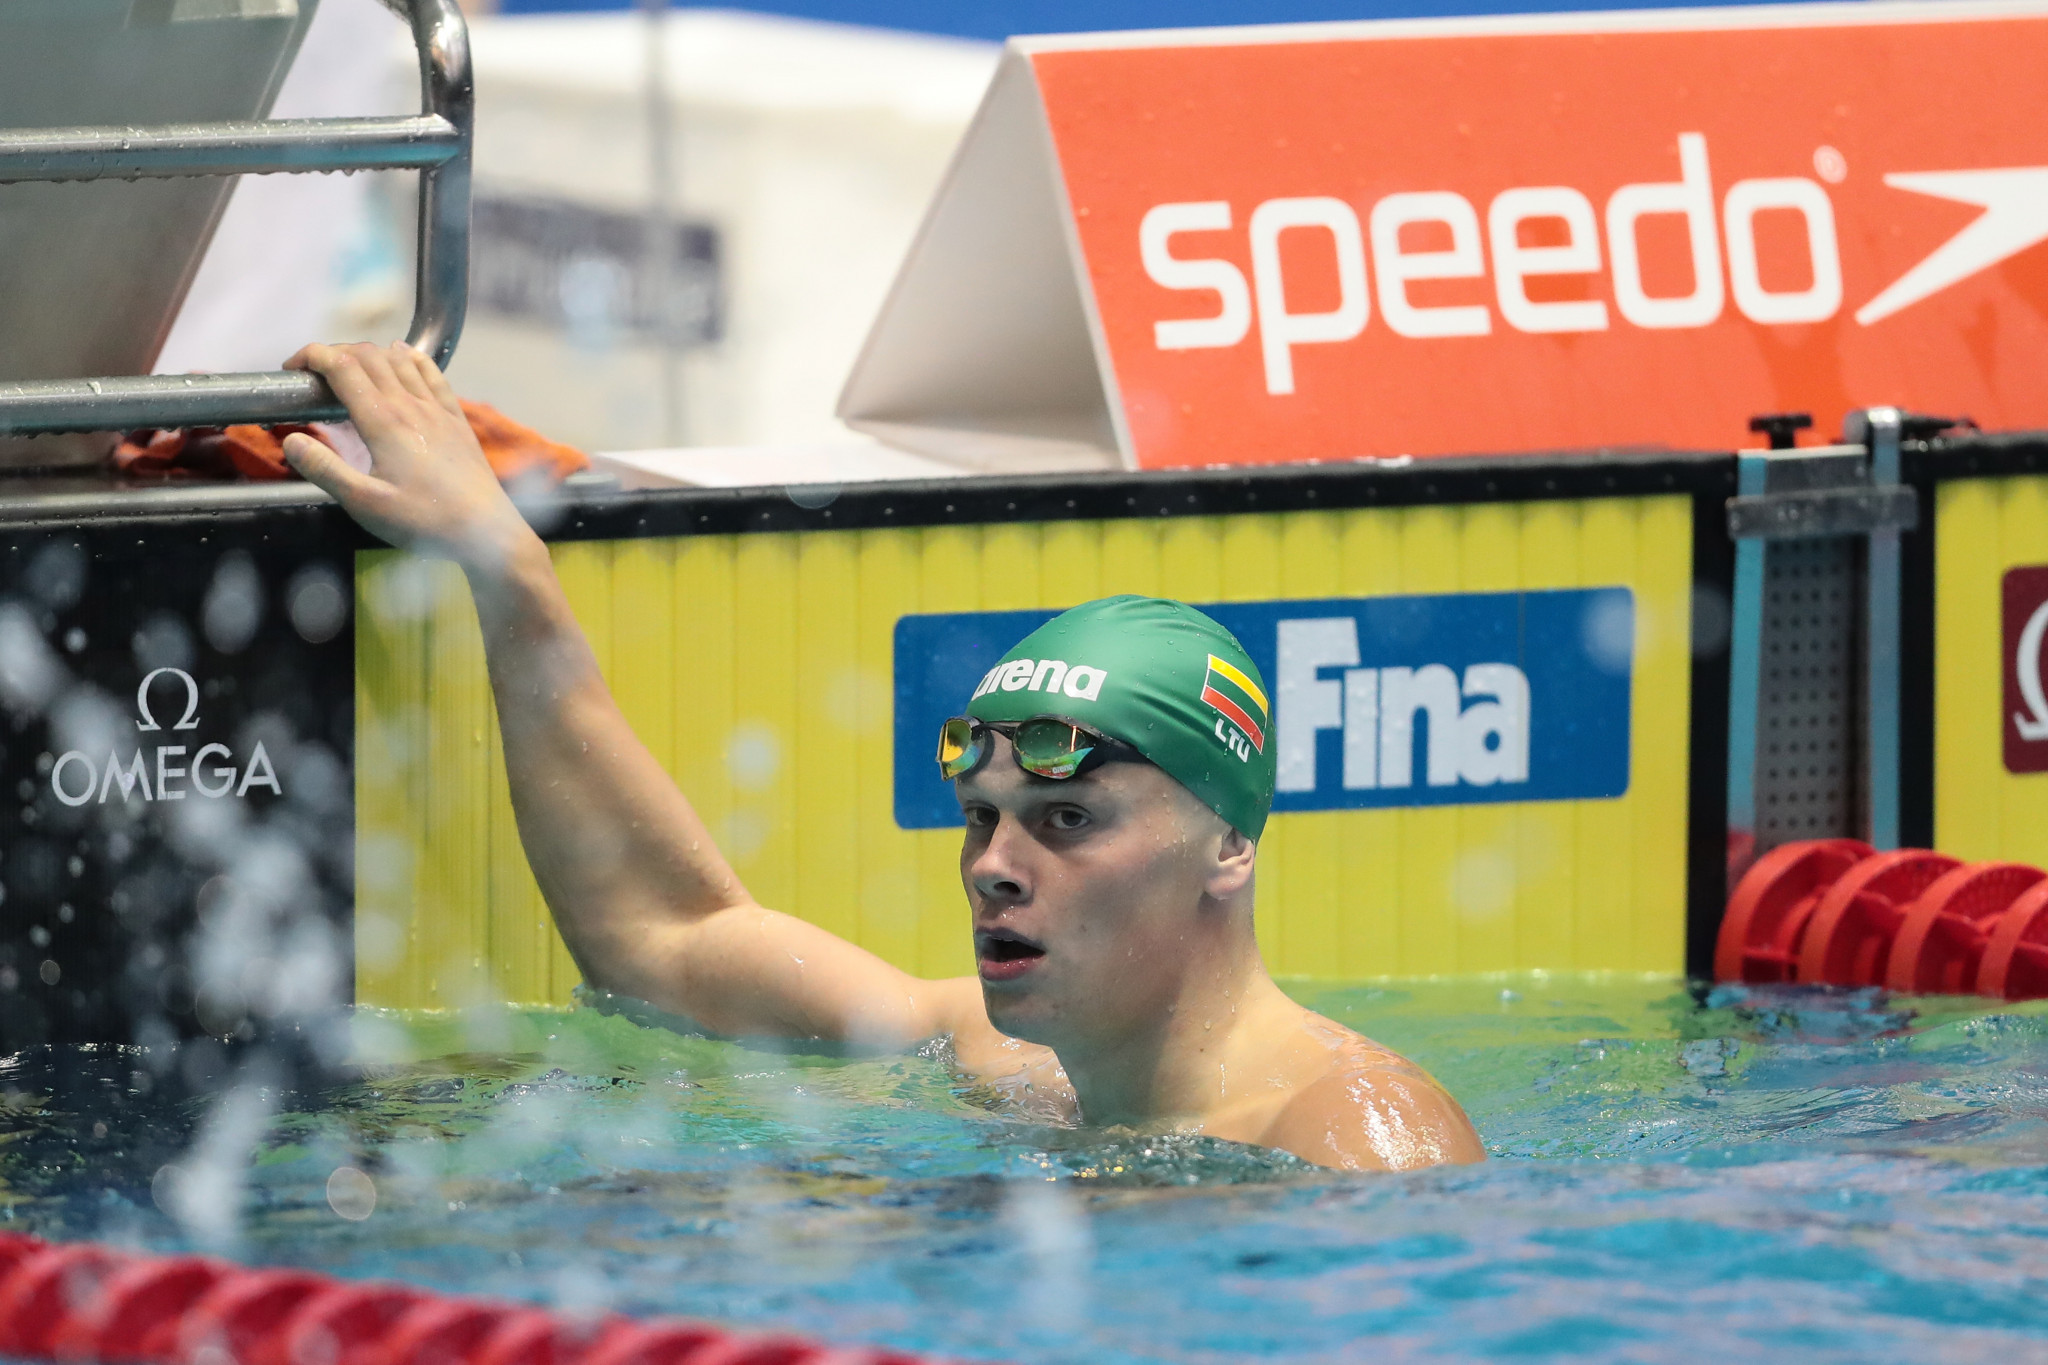 Lithuania's Danas Rapsys won the men’s 200m freestyle final ©Getty Images